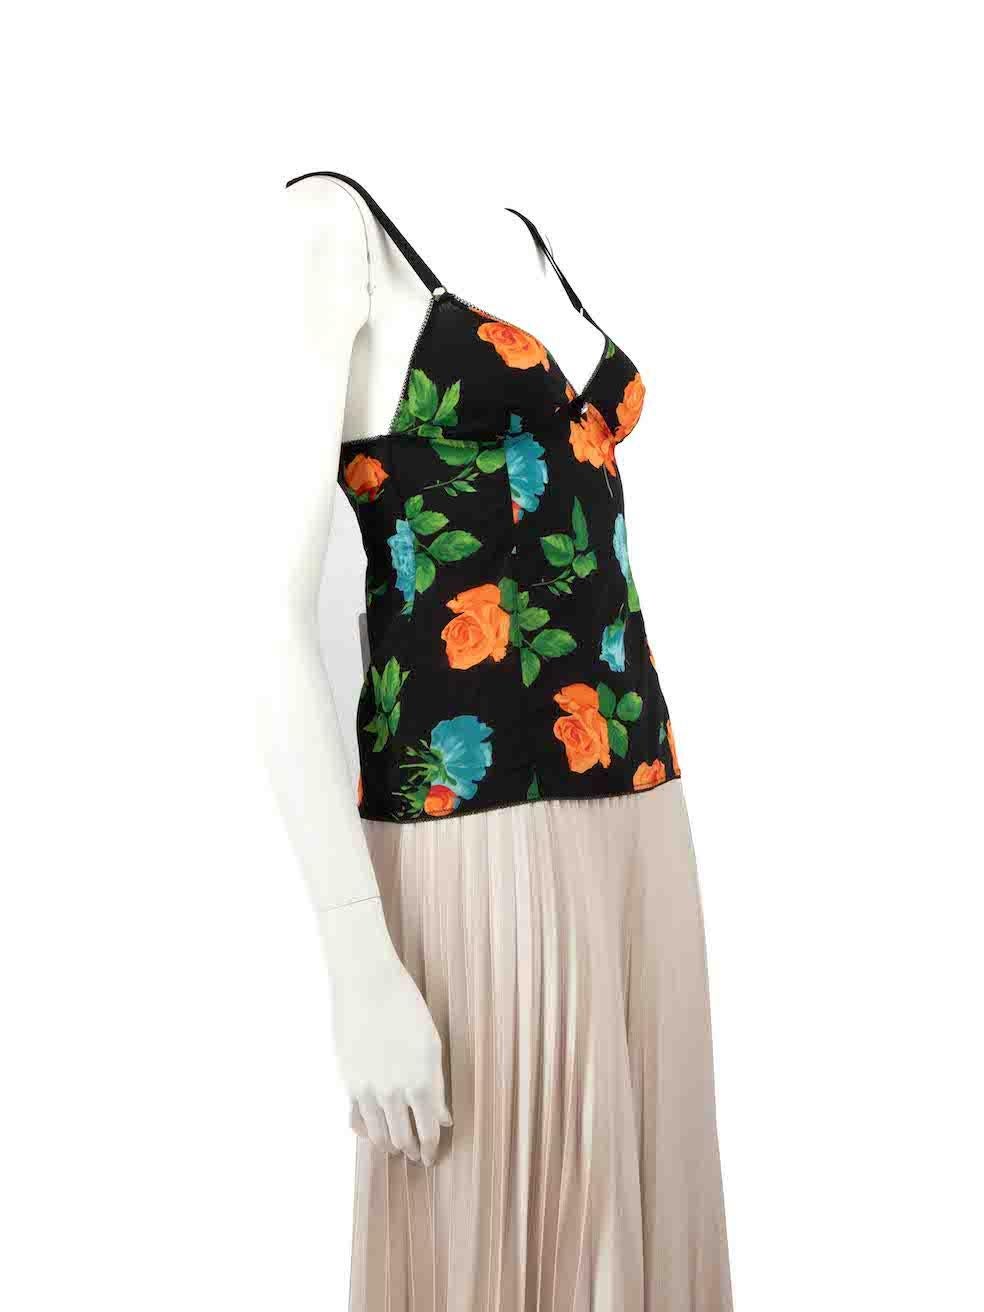 CONDITION is Never worn, with tags. No visible wear to top is evident on this new Dolce & Gabbana designer resale item.
 
 
 
 Details
 
 
 Multicolour
 
 Silk
 
 Camisole
 
 Floral pattern
 
 V-neck
 
 Adjustable shoulder straps
 
 Sheer
 
 
 
 
 
